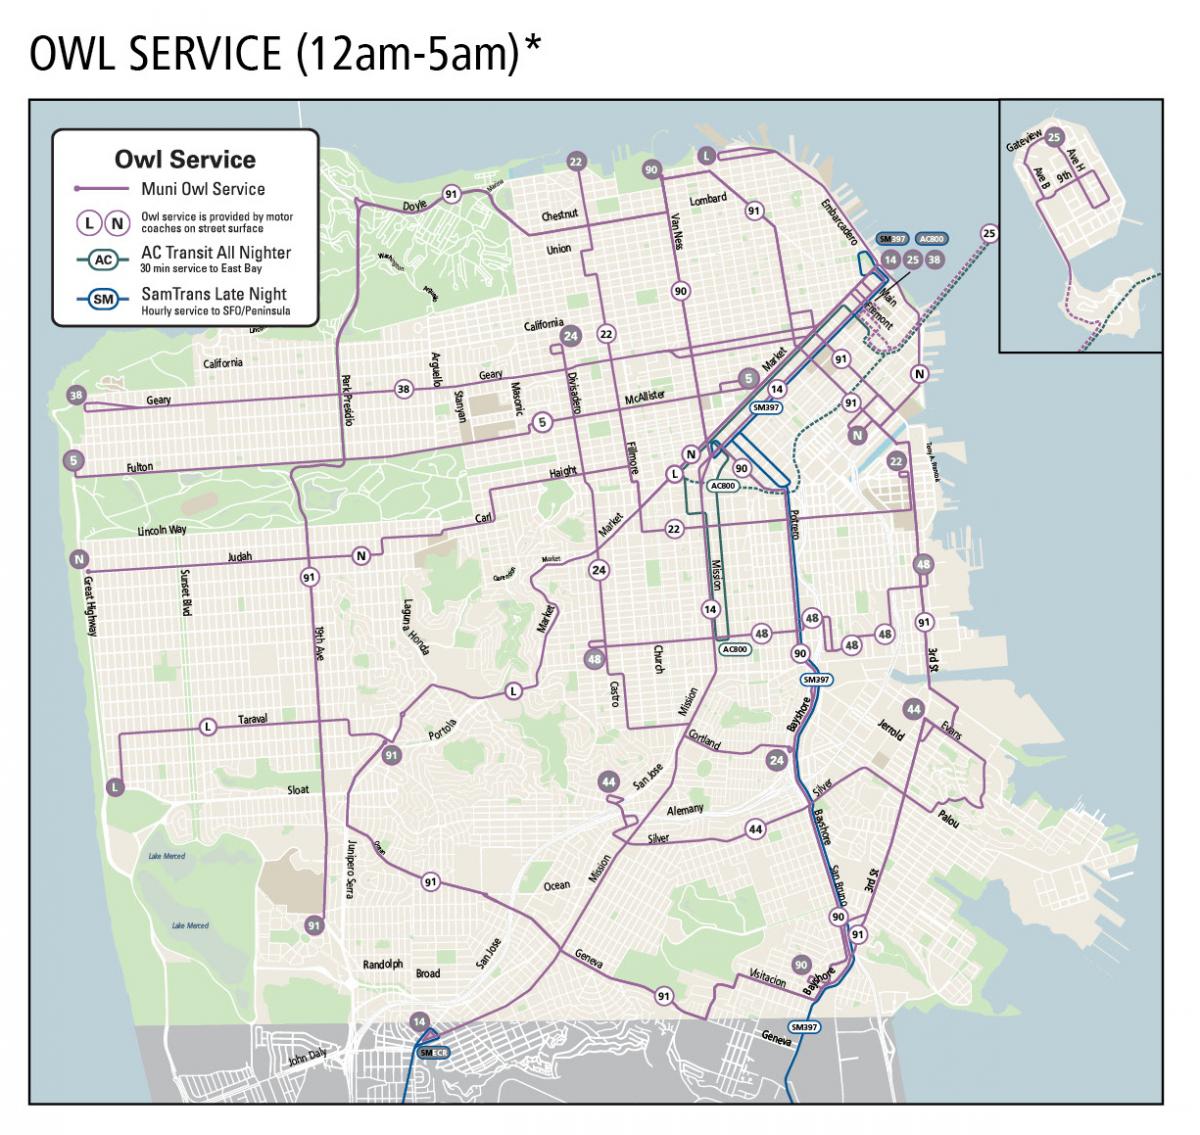 Map showing the routes that have Owl Service for Muni, AC Transit and SamTrans.